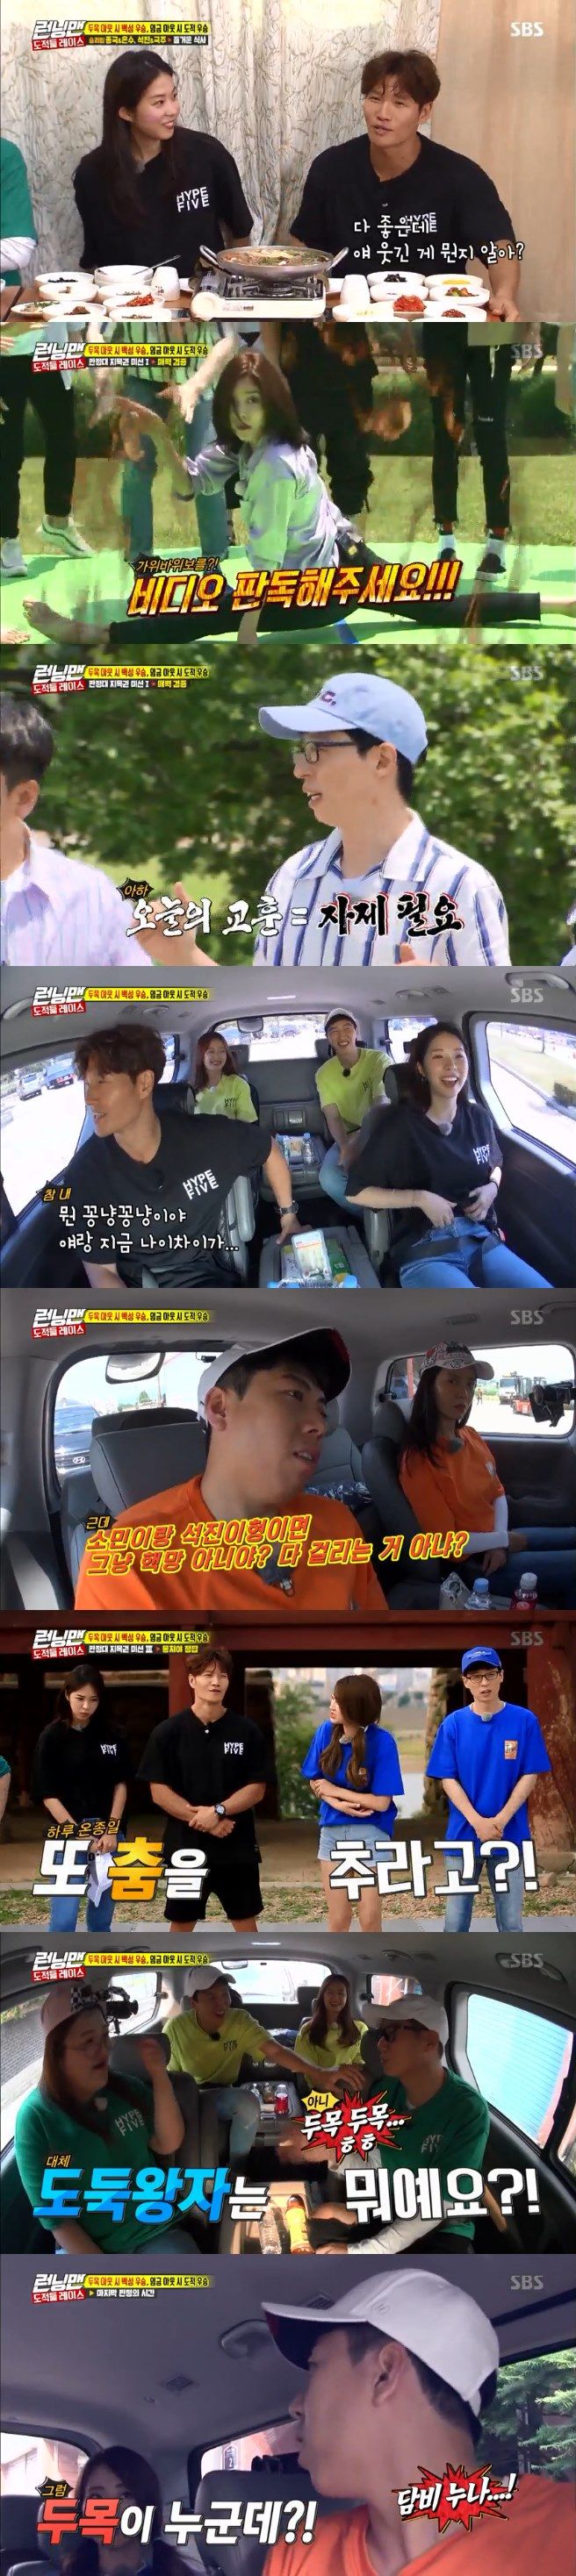 On SBS Running Man broadcasted on the 17th, Yoo Jae-Suk Ji Suk-jin Kim Jong-kook Lee Kwang-soo Haha Song Ji-hyo Yang Se-chan Jeon So-min played Trops Race in Iksan, Jeonbuk.Guests included Son Dam-bi, Seo Eun-soo, Lee Guk-joo and Nine Muses Kyungri.Kim Jong-kook and Seo Eun-soo, who were divided into two teams on the day, formed a love line. Kim Jong-kook did not smile and laugh at his younger brothers teasing.Rather, he continued to warm up to Seo Eun-soo, explaining that he was not such a person.How many age differences are there? He said to Seo Eun-soo, We have to meet a good person.Kim Jong-kook and Seo Eun-soo were identified as people early on and came to the race comfortably.With Yoo Jae-Suk and Kyungri, they have been identified as people and have started to find bandits and bosses.In the subsequent mission, Lee Kwang-soo Jeon So-min Son Dam-bi Haha was all revealed as a thief; the number of bandits was three and the other was a boss.Here, Ji Suk-jin showed a suspicious movement and made him guess that he wrote something.But doubts about Ji Suk-jin were concluded as a bandit, not a wage.The savvy performance of Yang Se-chan has fooled all the people: Yoo Jae-Suk analyzed the fae, saying the wages were too poor.Song Ji-hyo Kim Jong-kook Seo Eun-soo Yoo Jae-Suk Kyungri Lee Guk-joo carried out the penalty while being hit by a water bomb.